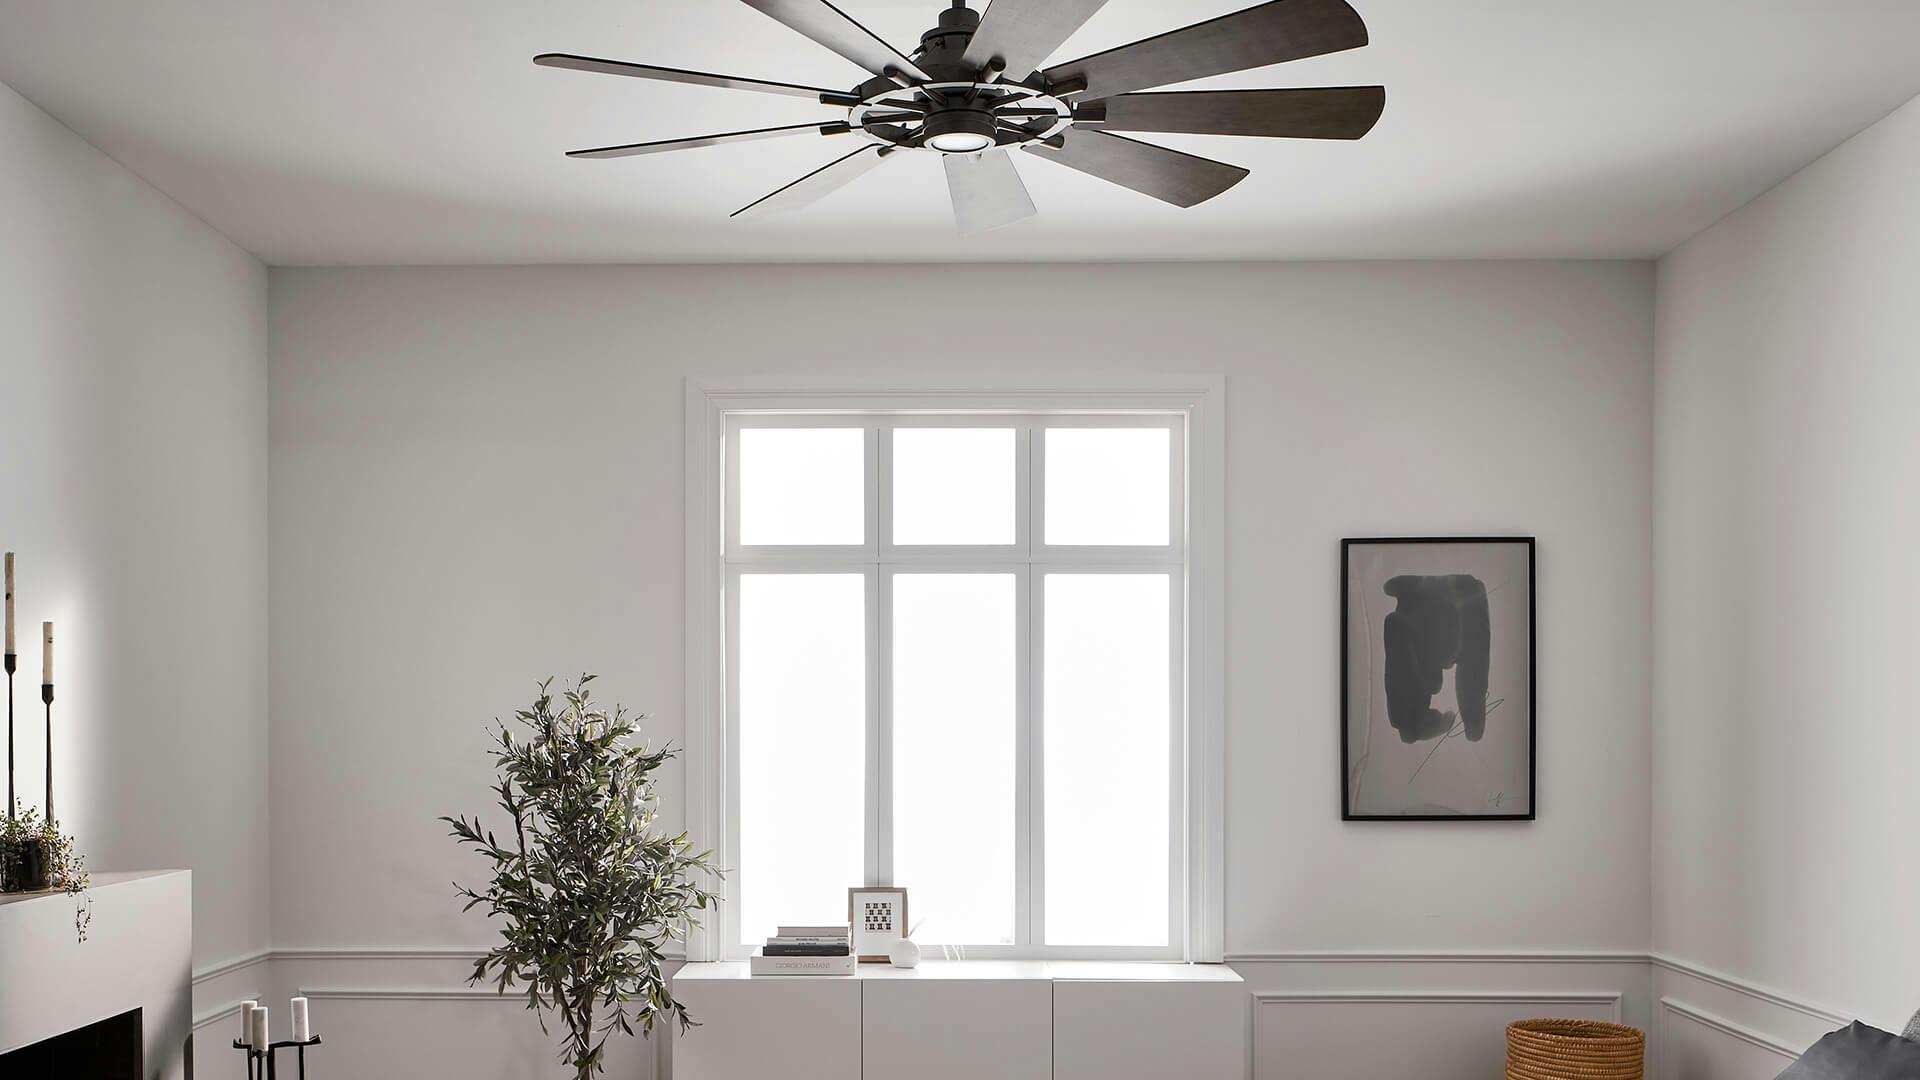 Sun shines through a central window of a white bedroom with a Gentry ceiling fan mounted above